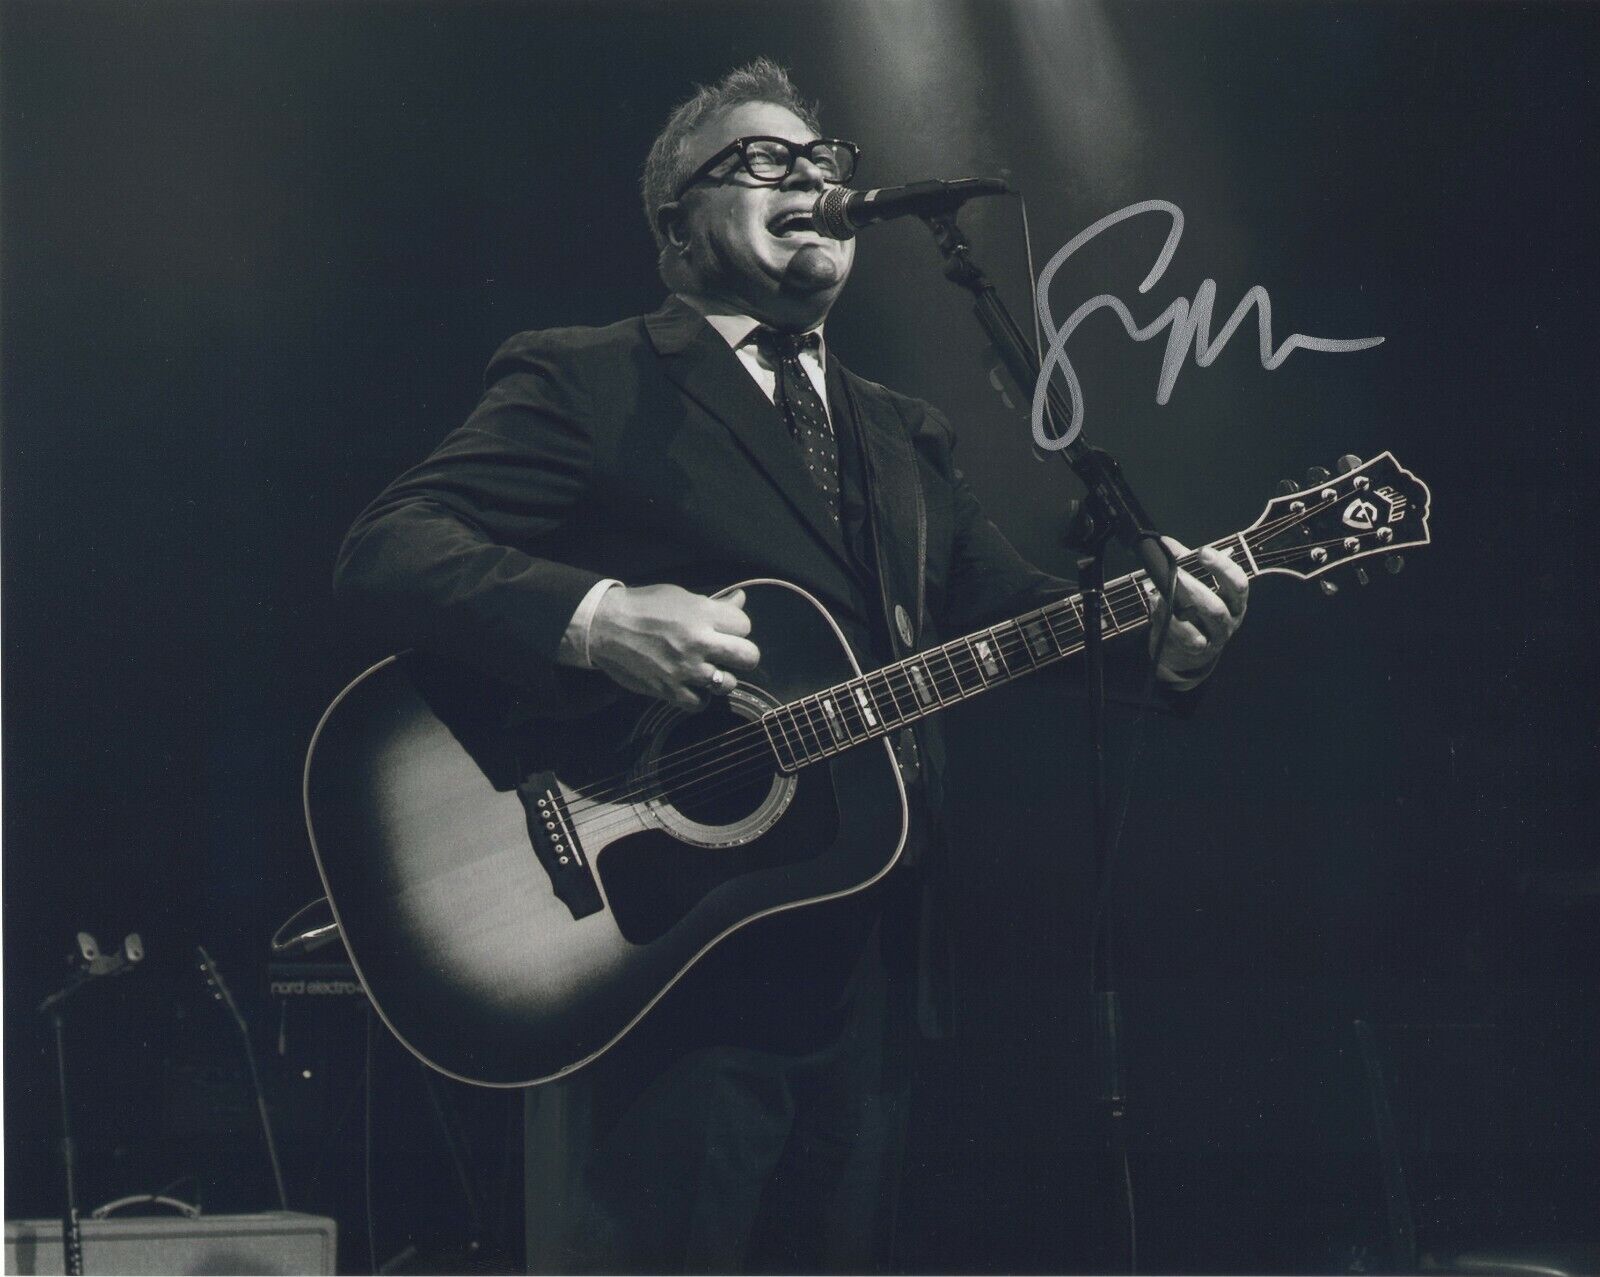 STEVEN PAGE SIGNED AUTOGRAPH 8X10 Photo Poster painting BARENAKED LADIES PROOF #4